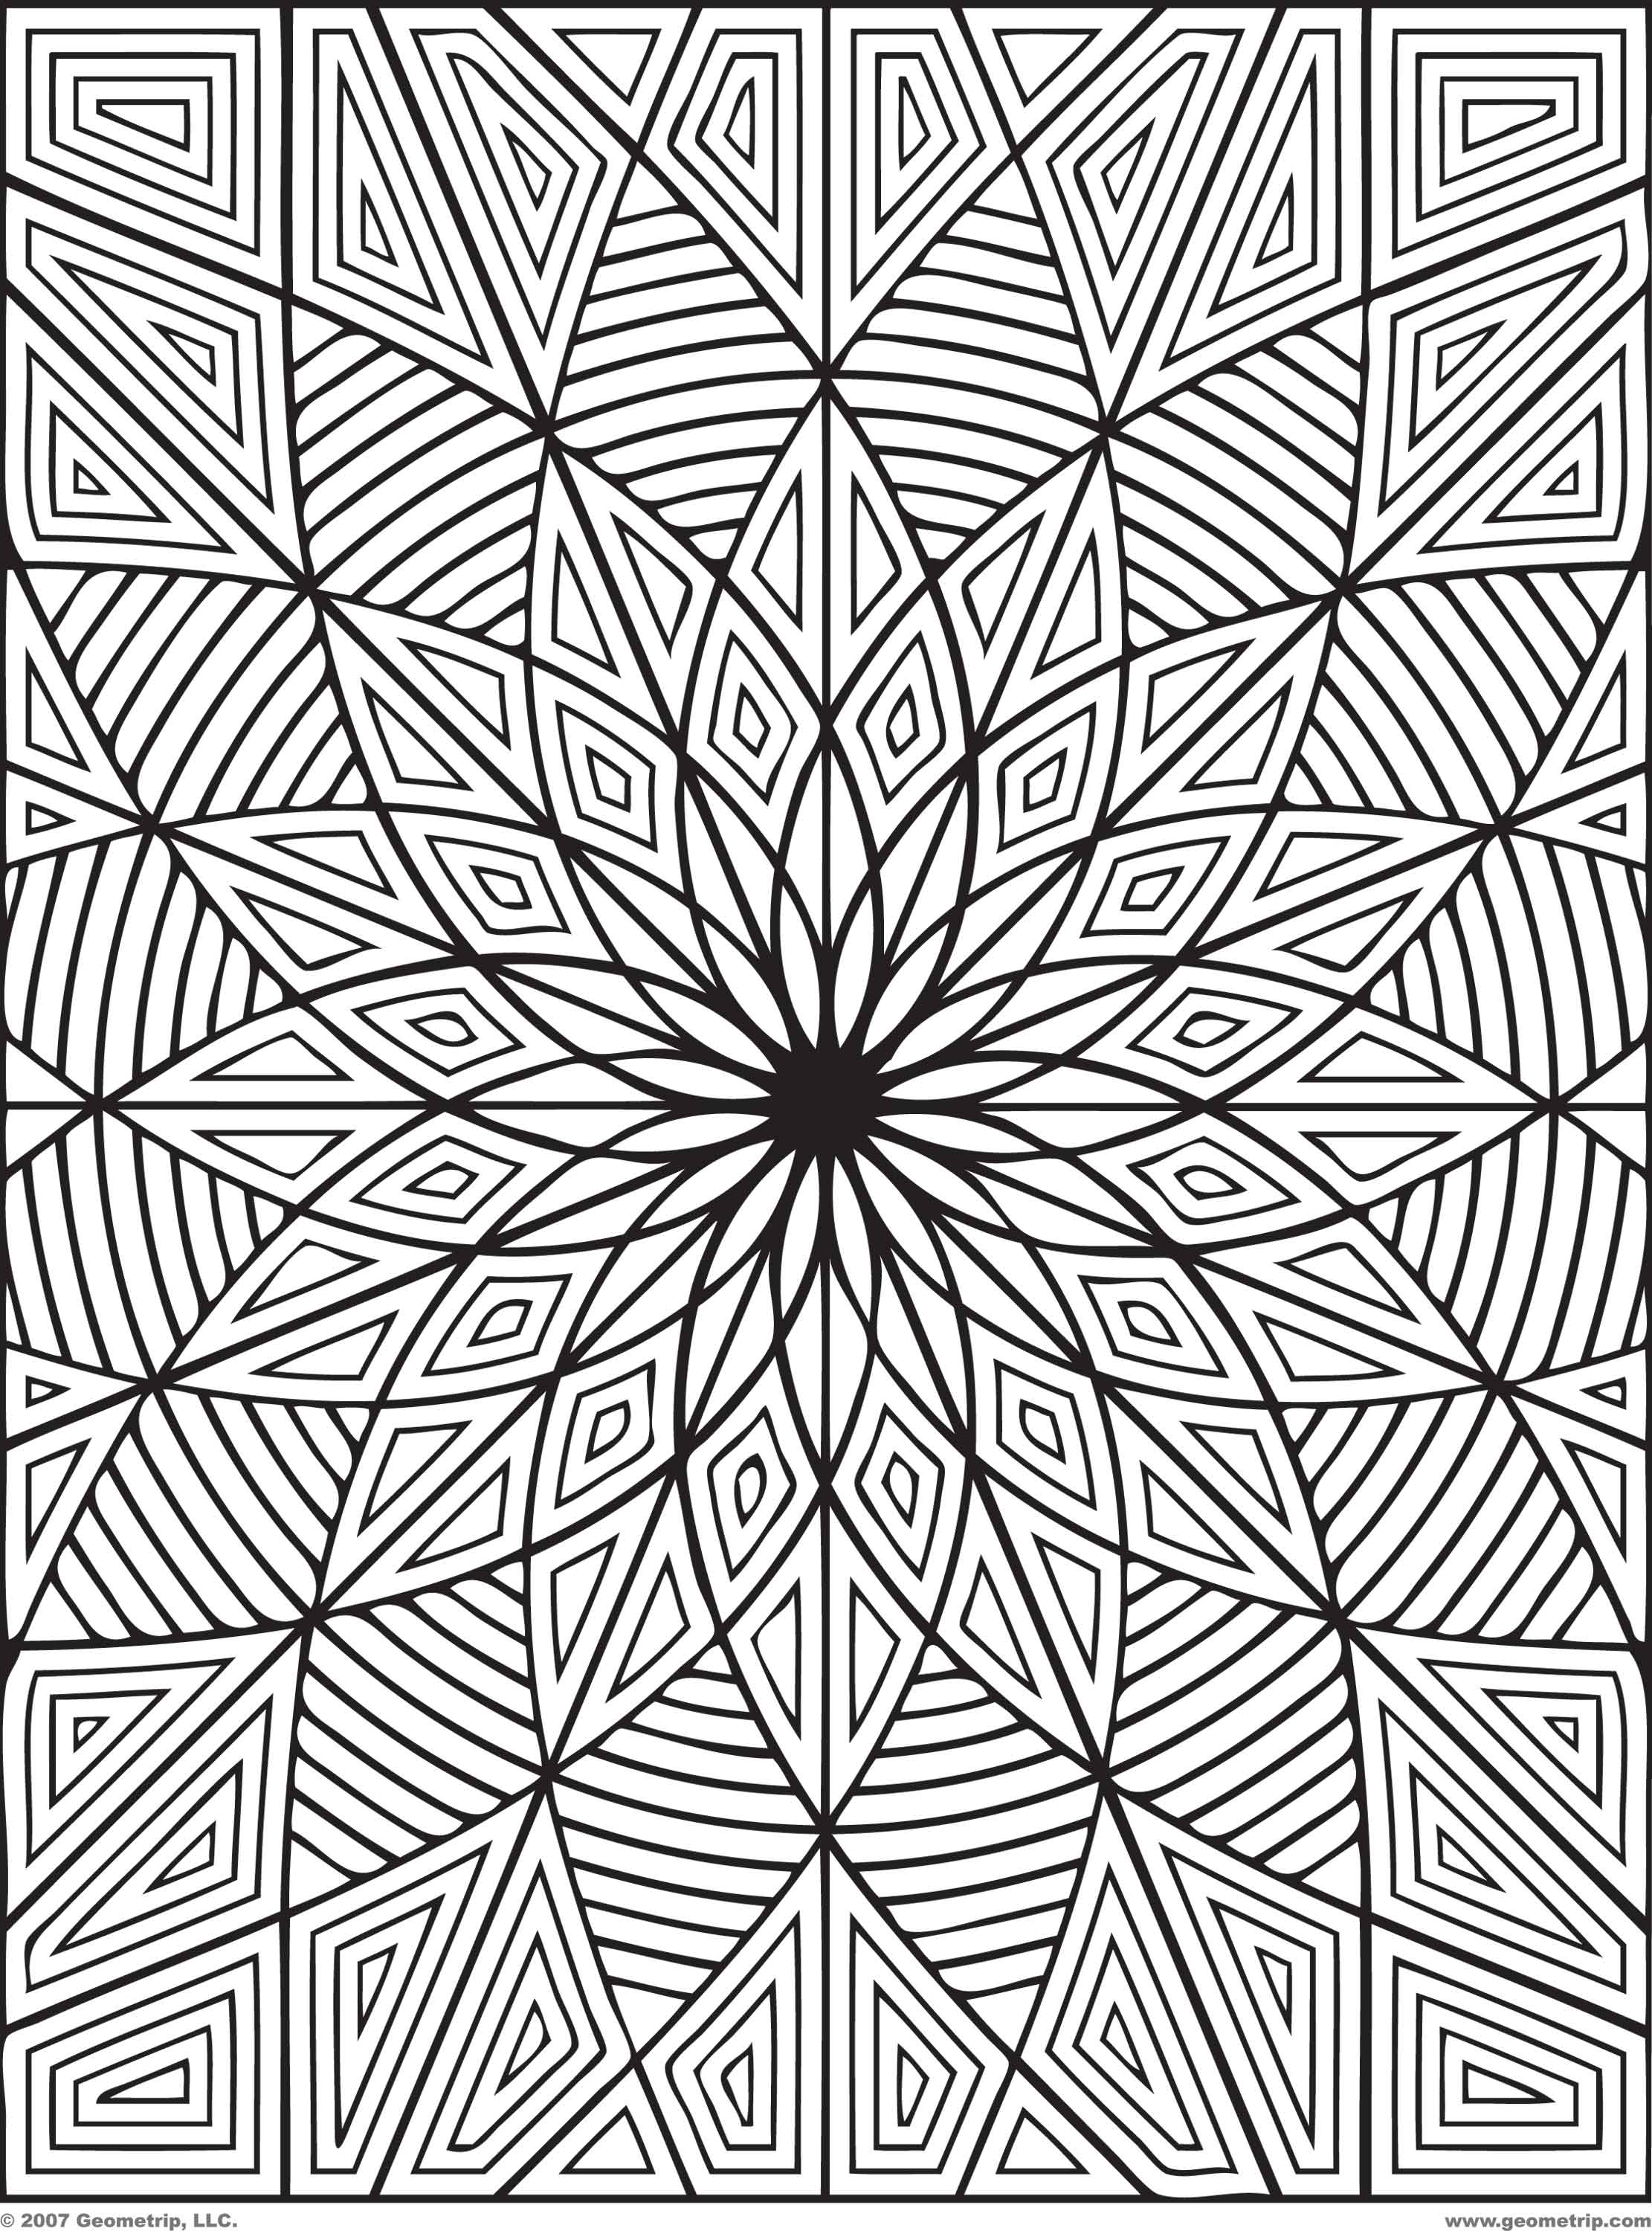 Cool Designs For Coloring - Coloring Pages for Kids and for Adults